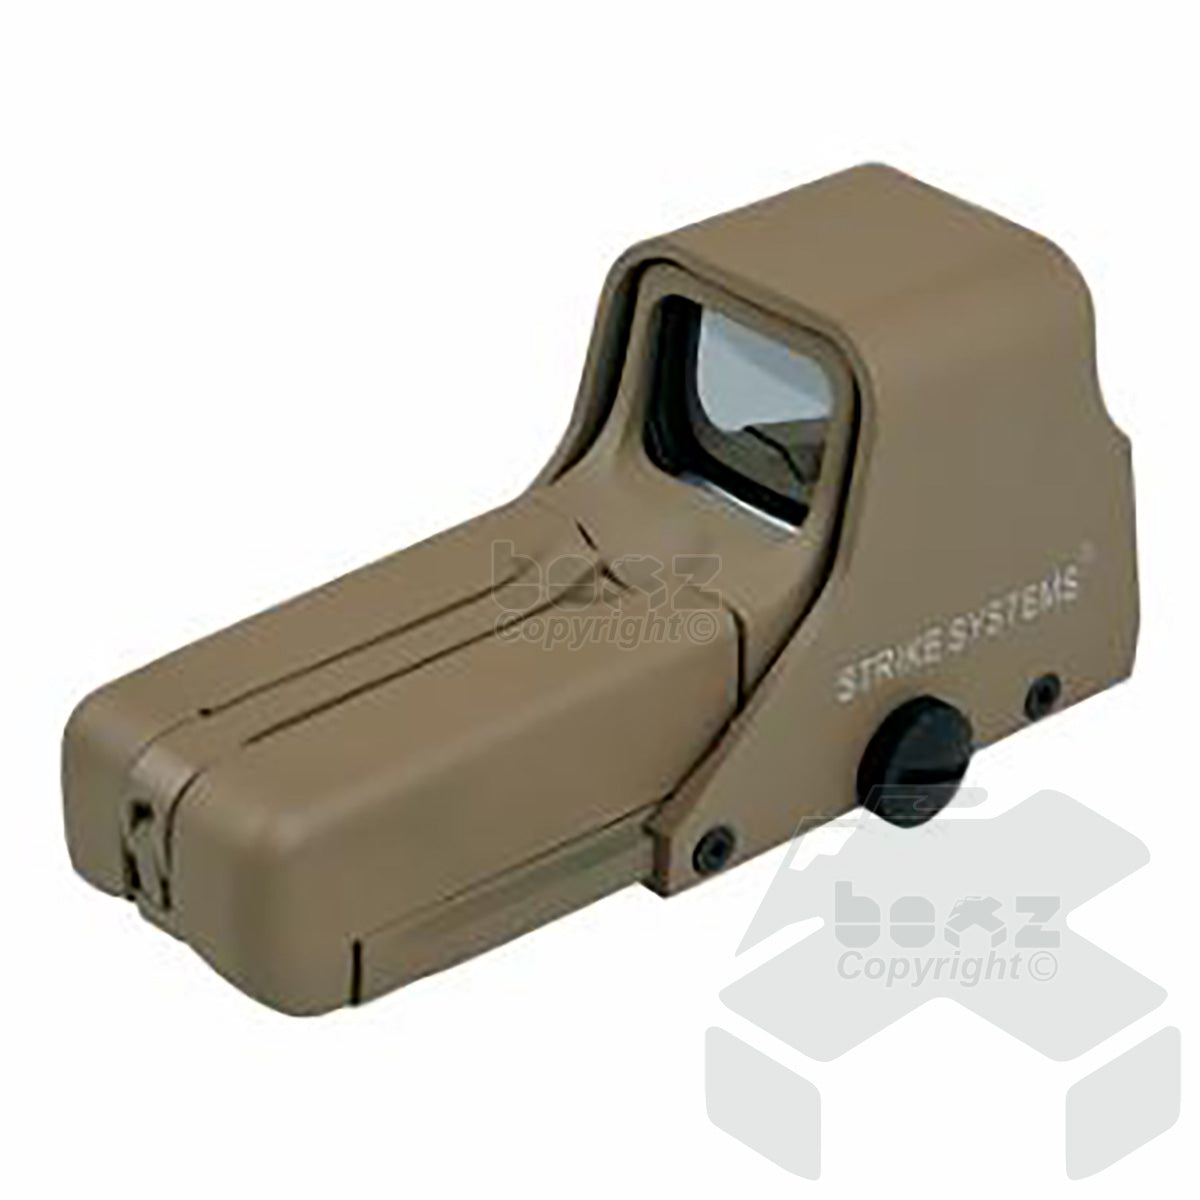 Strike Systems Advanced 552 Red/Green Holographic sight - desert